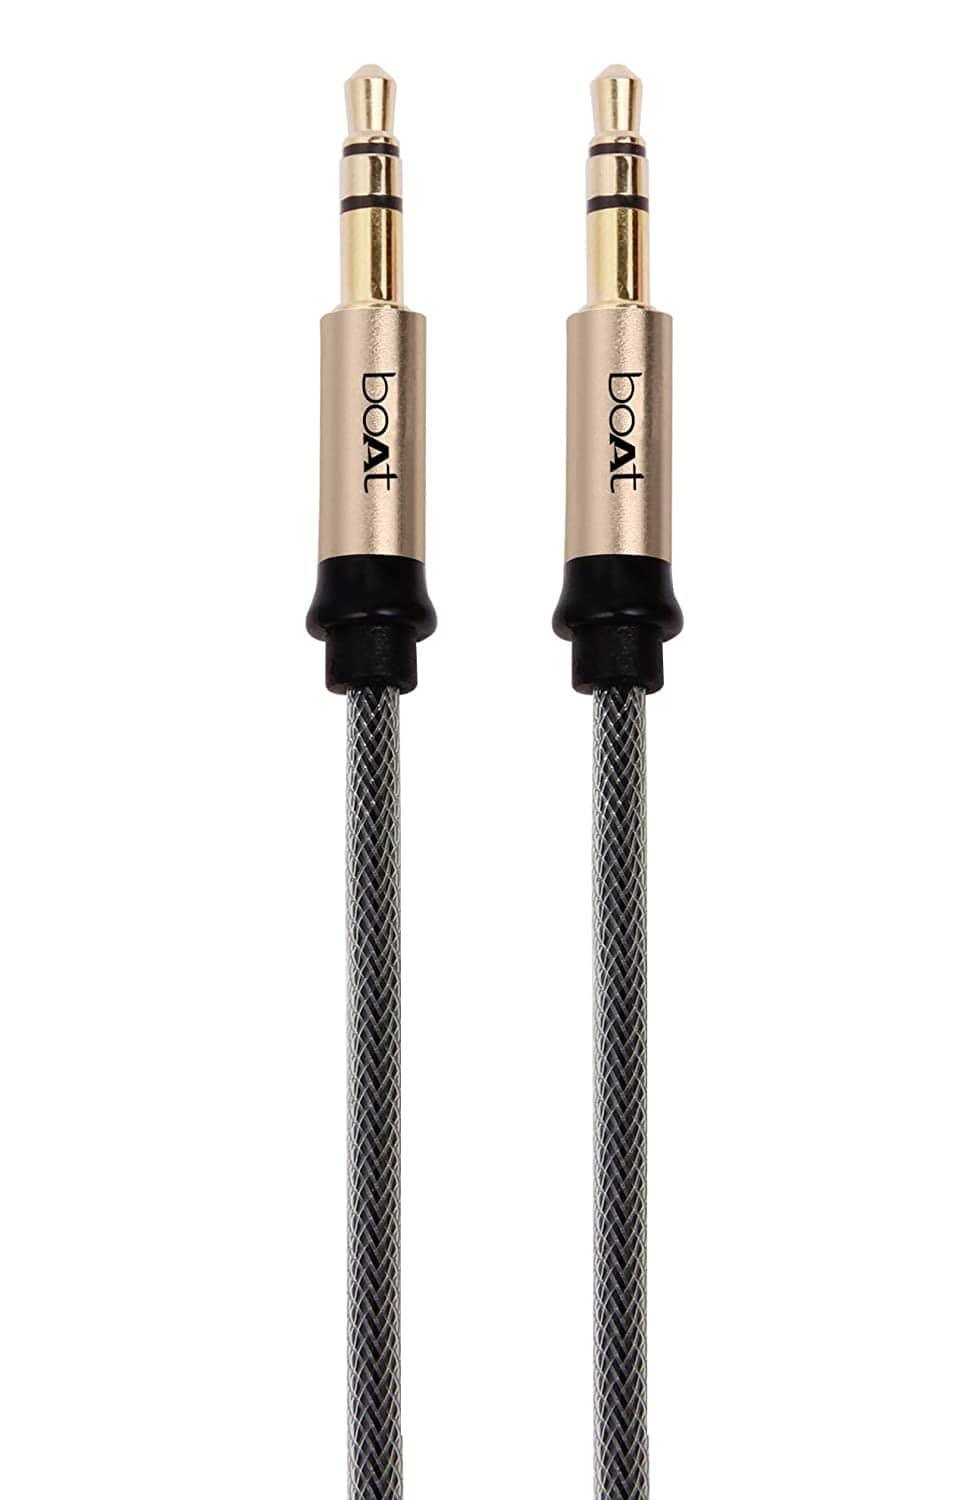 boAt 3.5mm Male to Male Gold Plated Connectors, Metallic Aux Audio Cable-aux cable-dealsplant